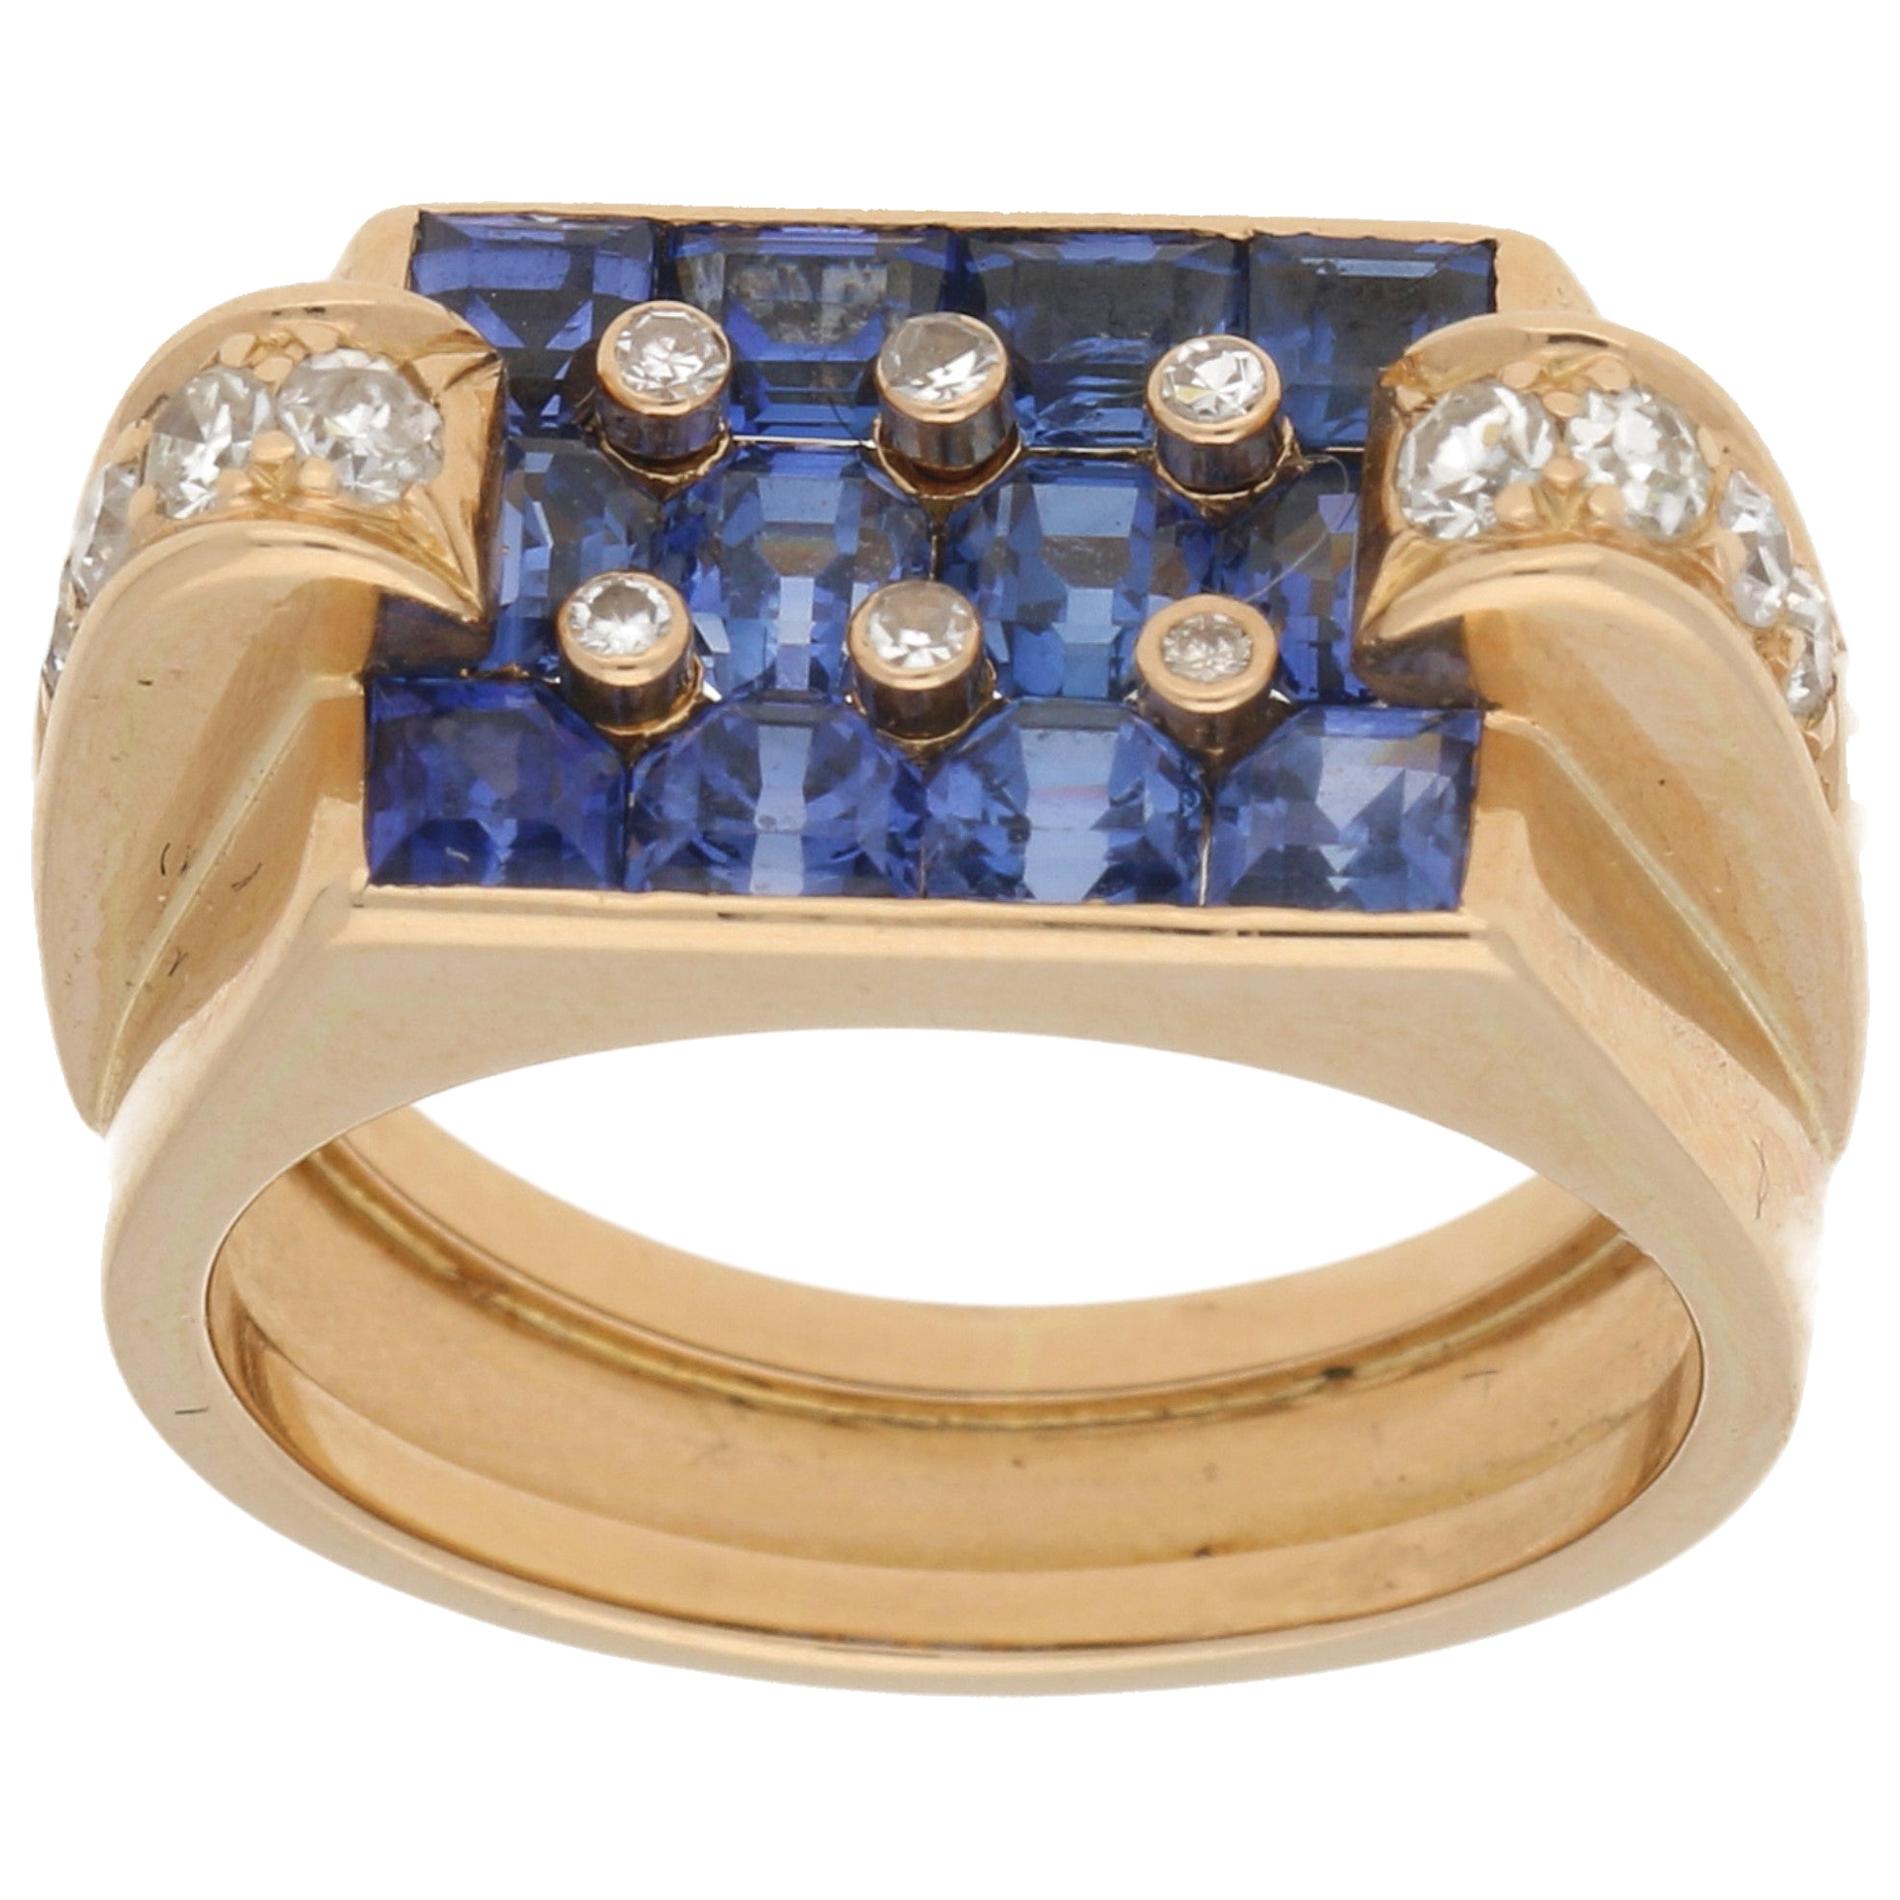 Sapphire and Diamond Cocktail Ring Set in 18k Rose Gold, circa 1940